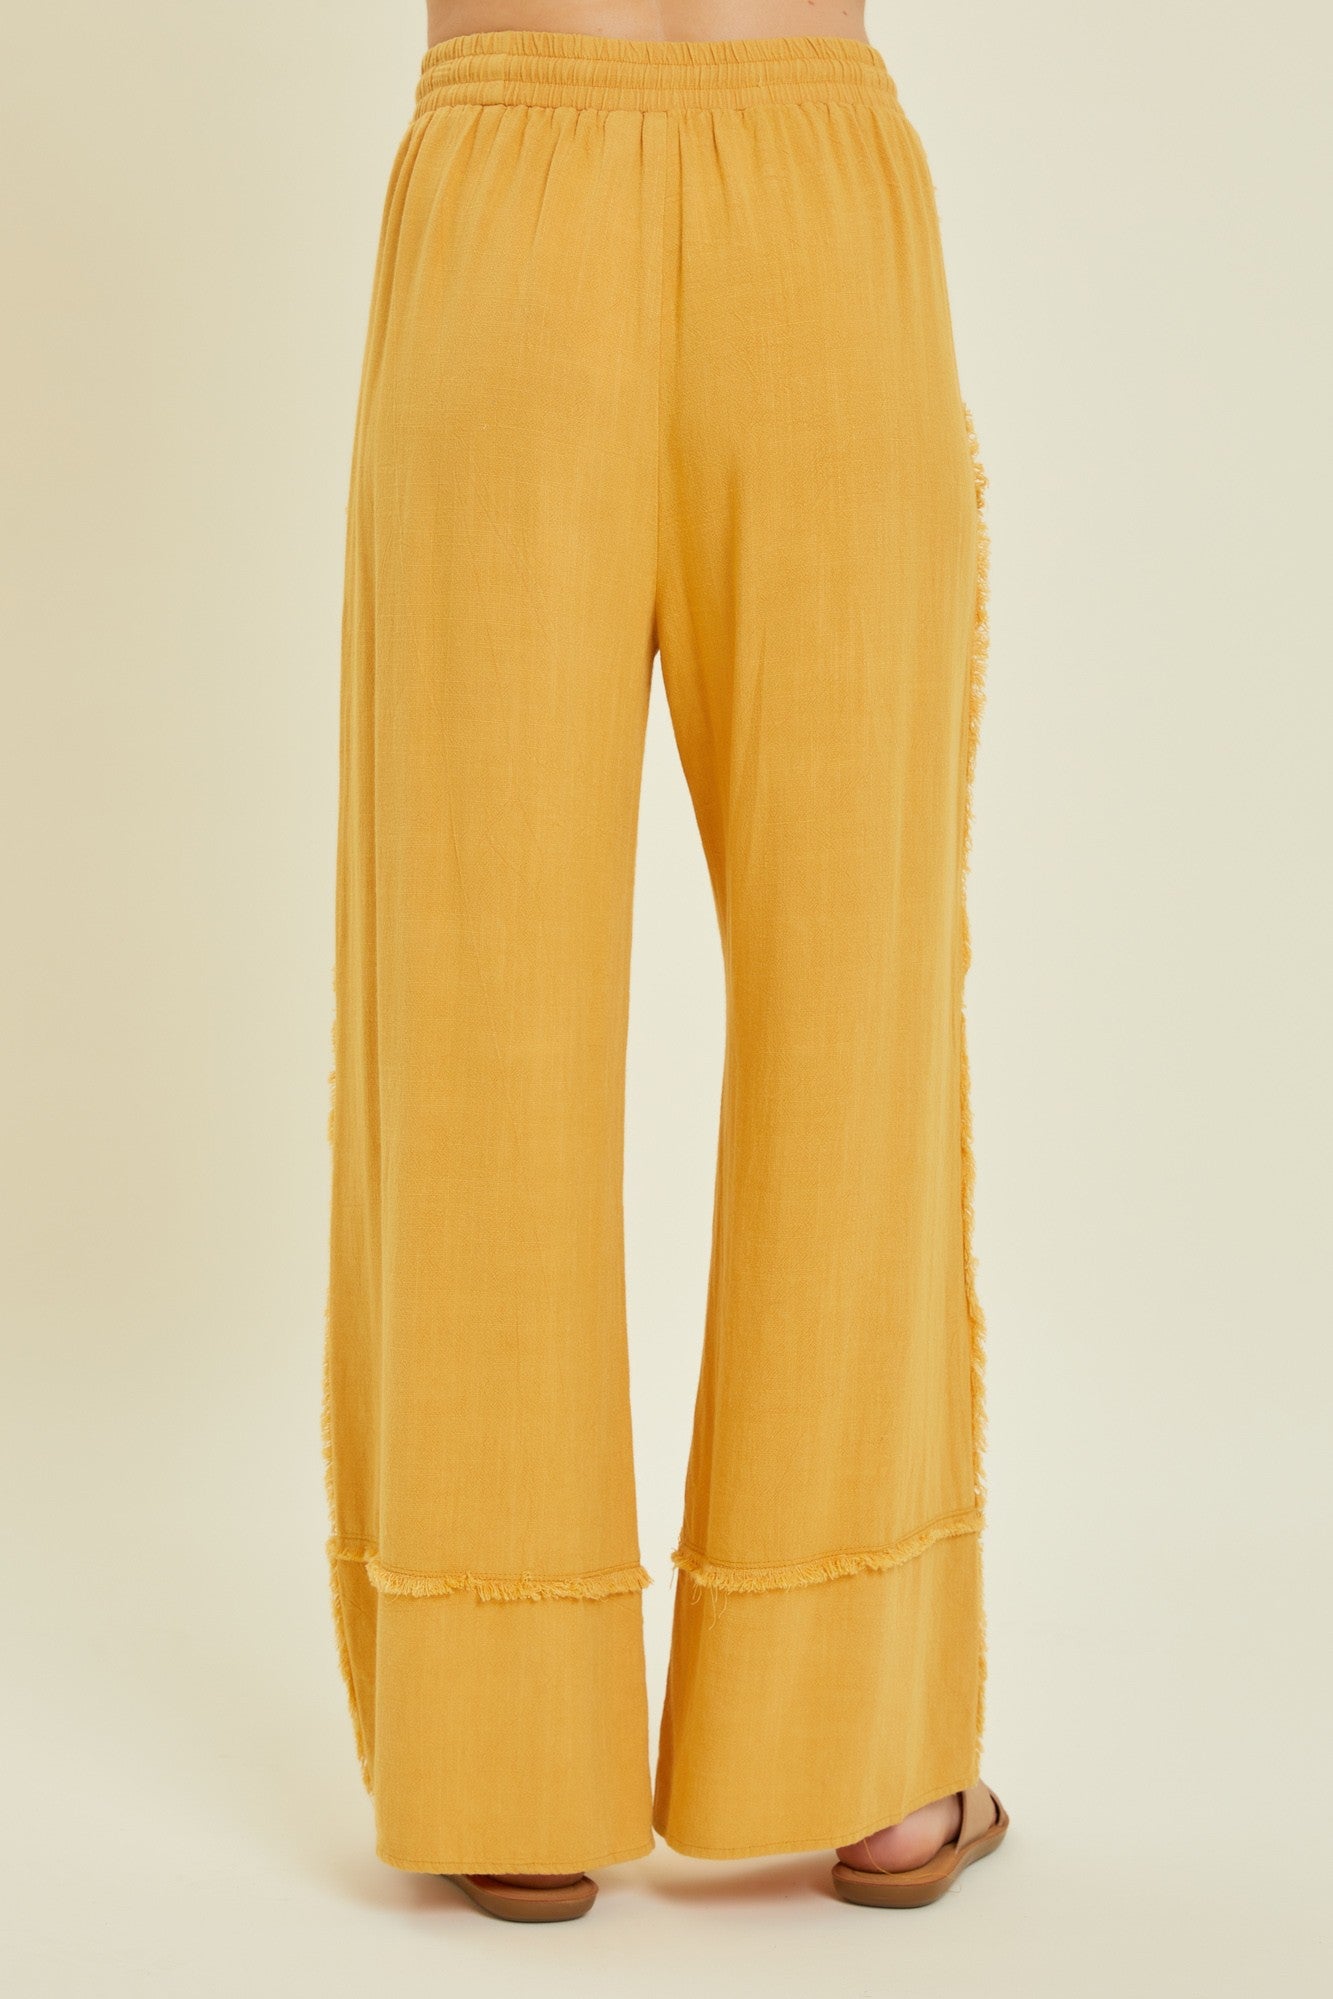 Ariana Mineral Wash Wide Leg Pants with Raw Hemming in Golden Yellow